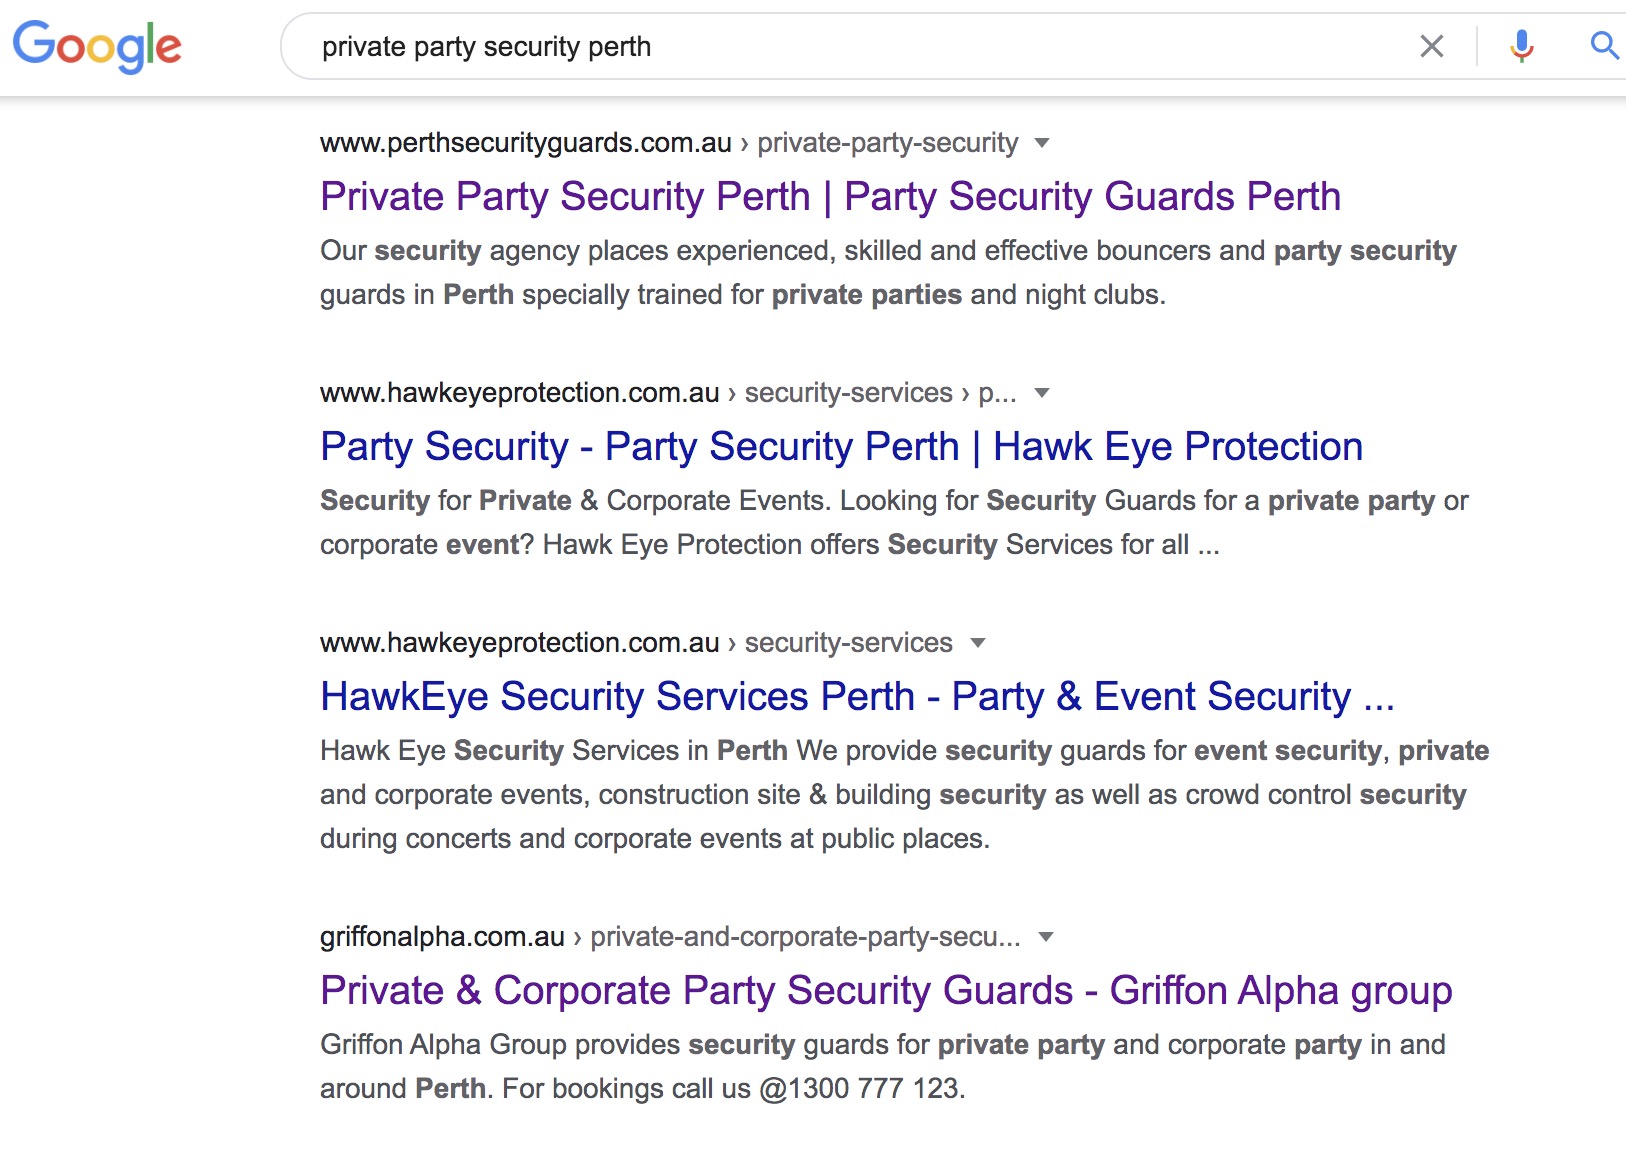 Perth Security Guards SEO result